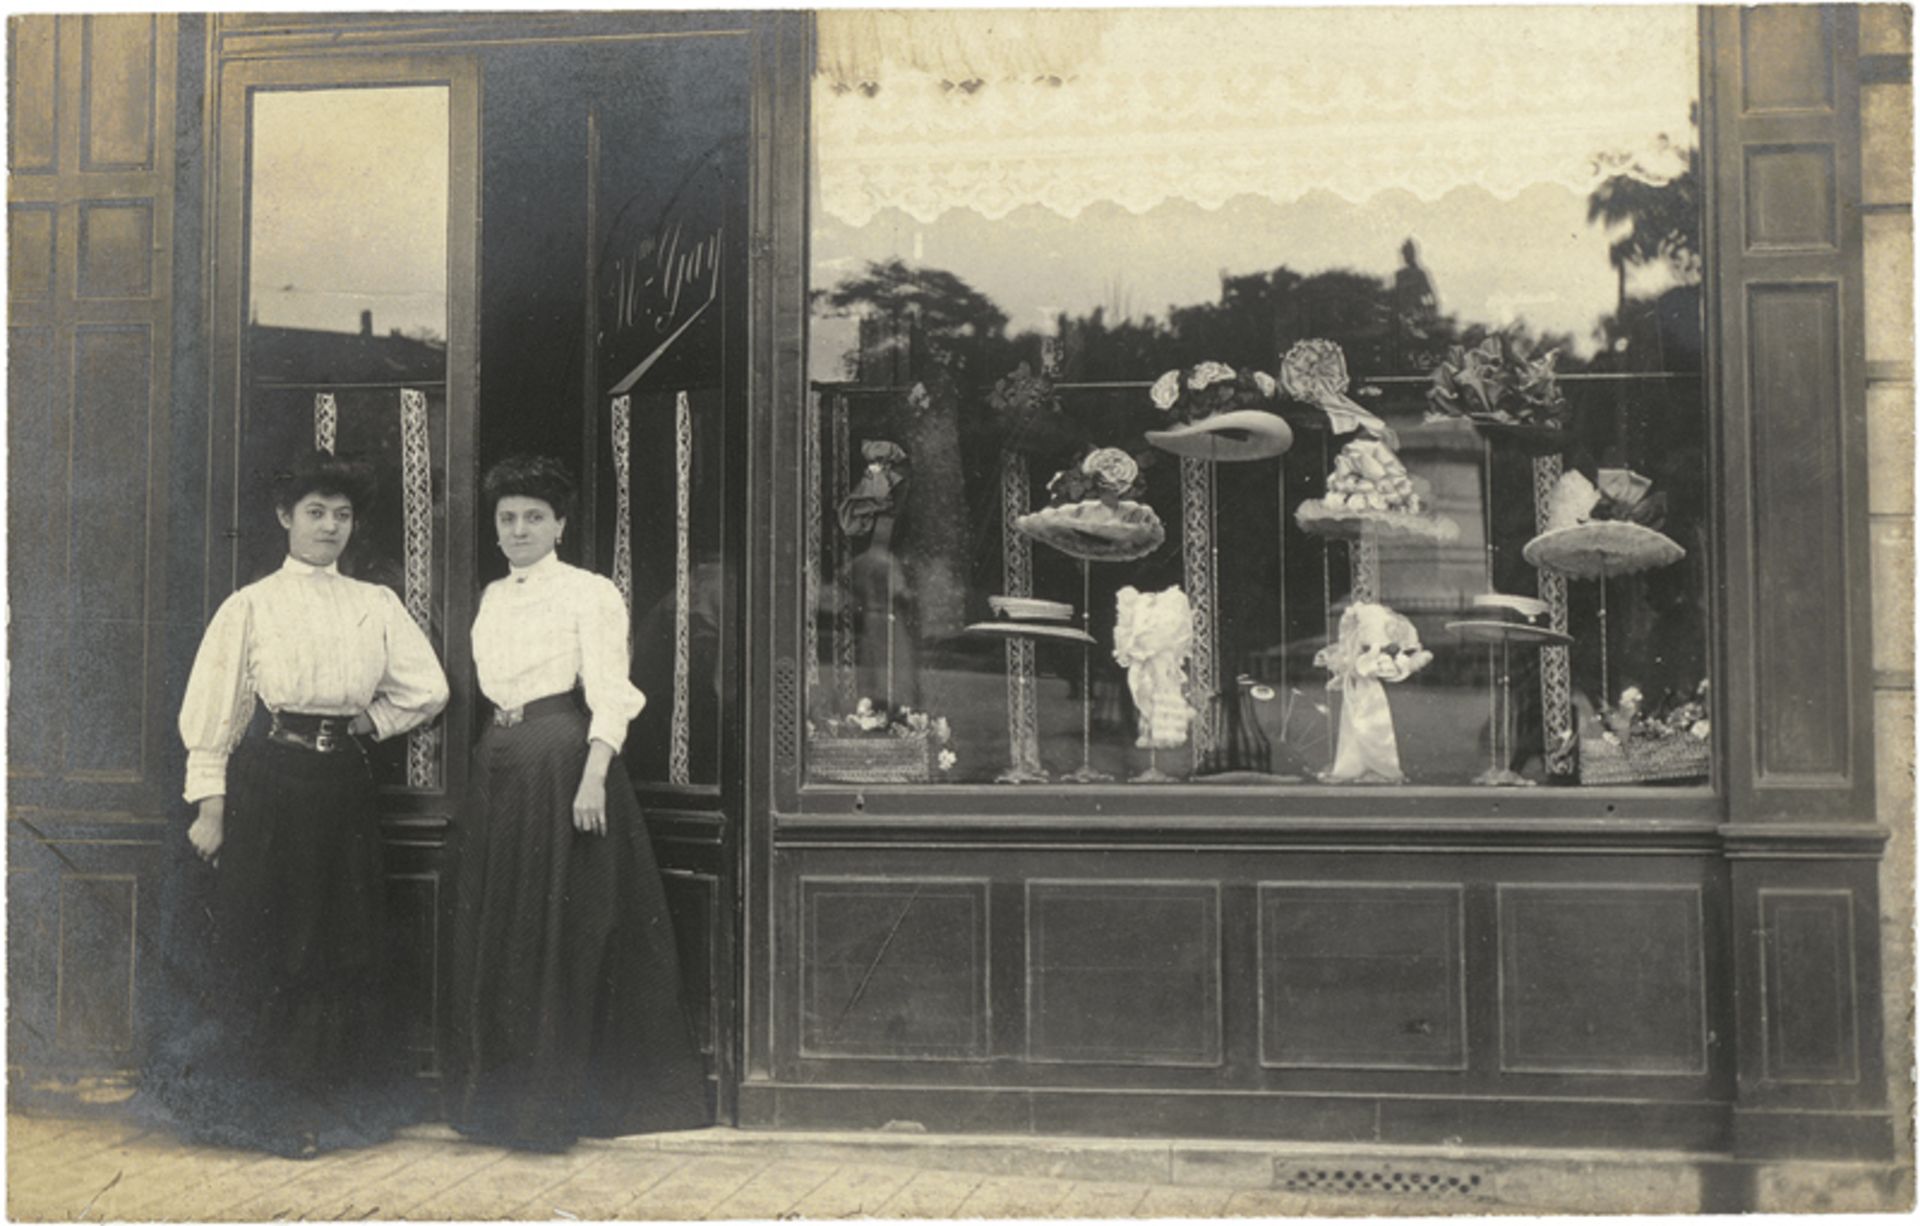 French Shops and Restaurants, Views of: Views of French shops and restaurants - Image 7 of 8